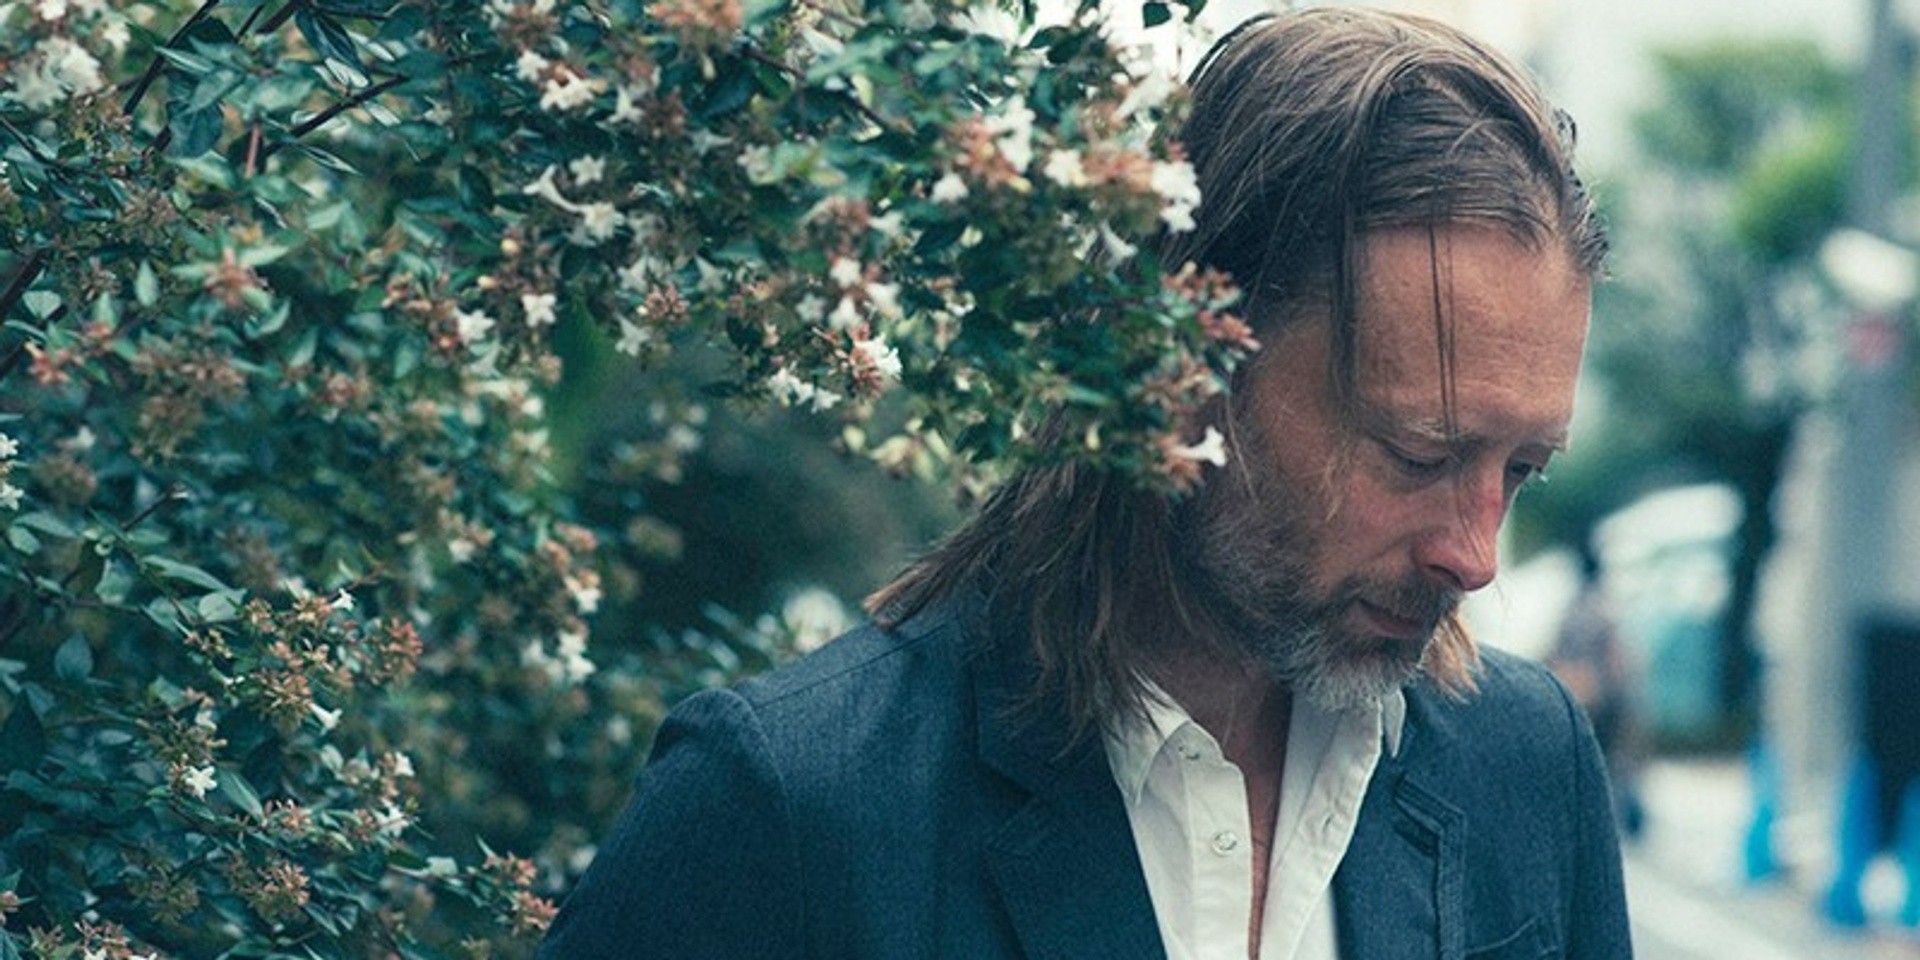 Thom Yorke debuts new song 'The Axe' during first show of European tour – watch